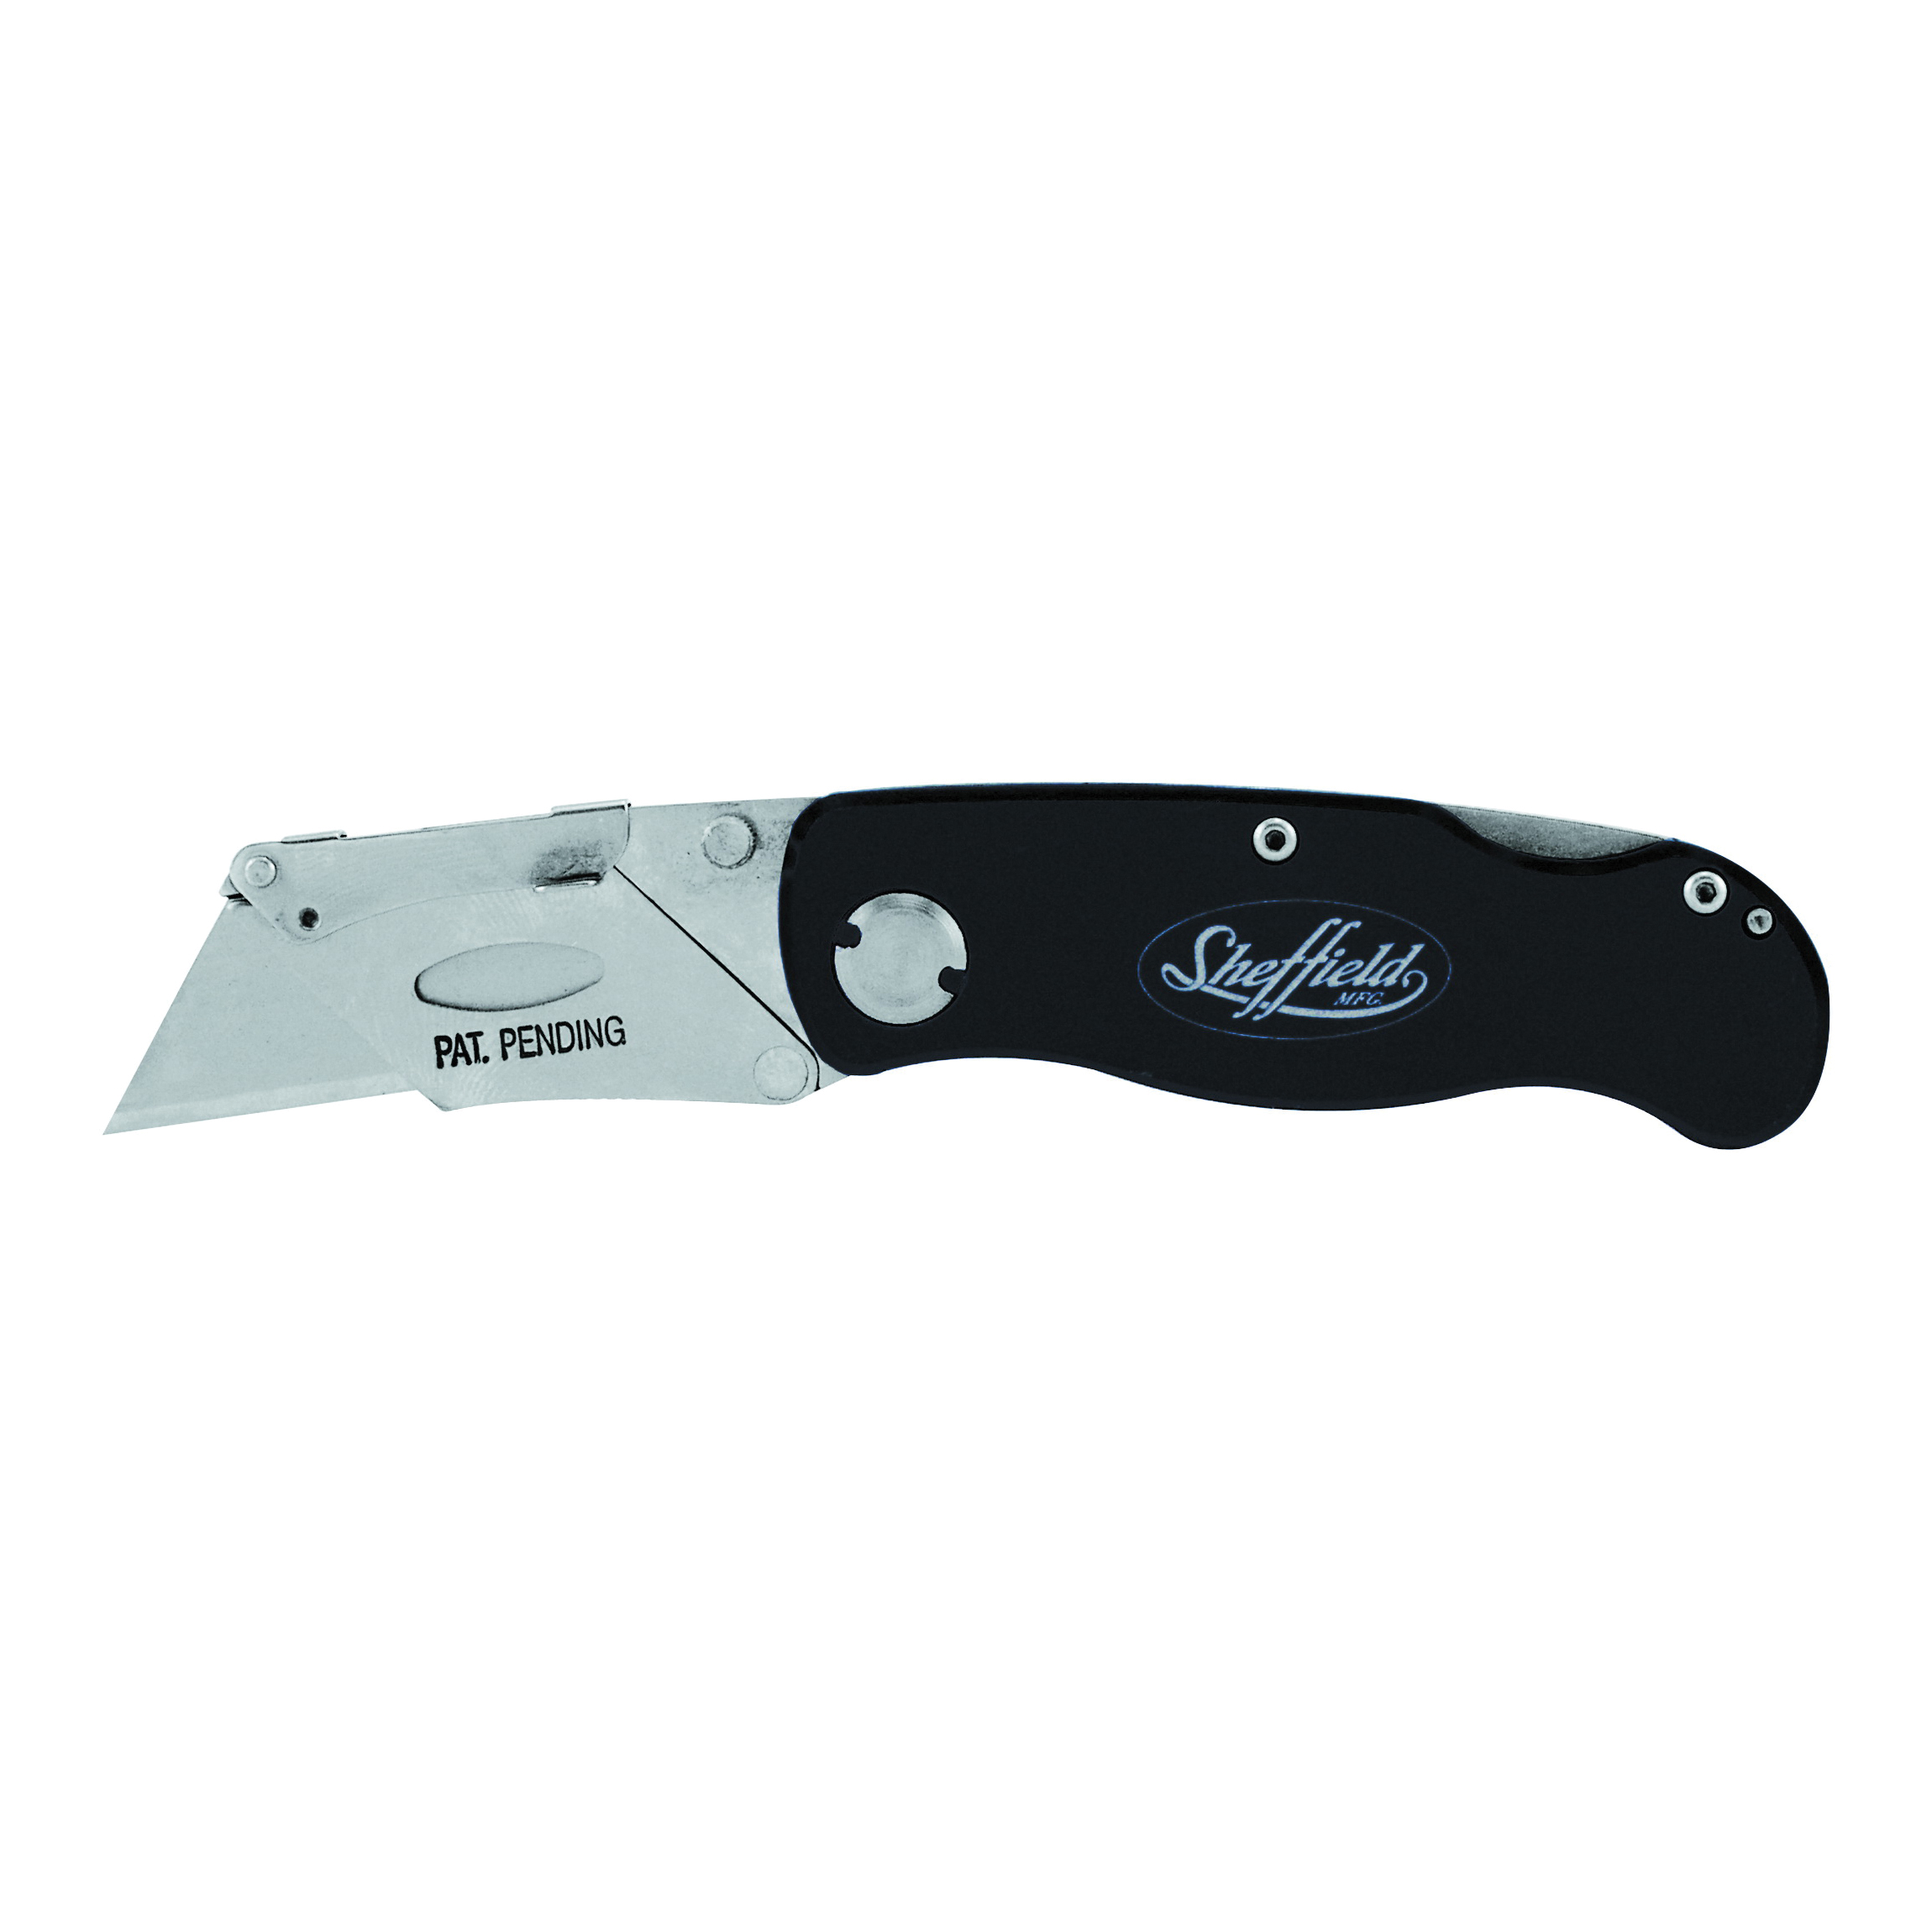 12613 Utility Knife, 2-1/2 in L Blade, Stainless Steel Blade, Curved Handle, Black Handle